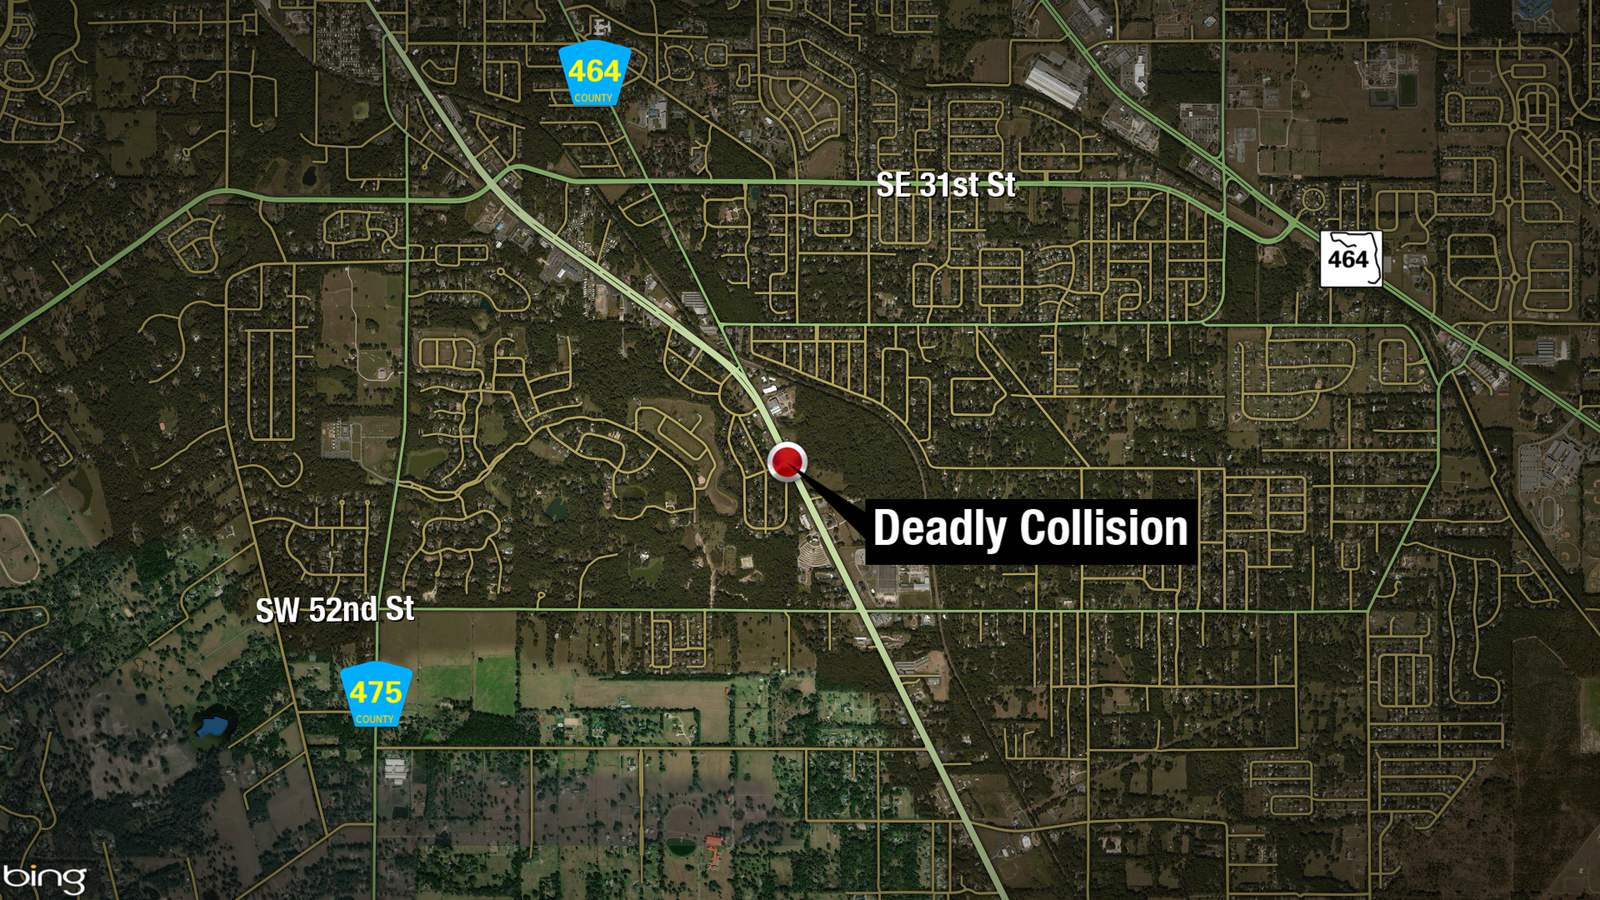 Ocala woman left lying in road dies after getting hit by car, troopers say